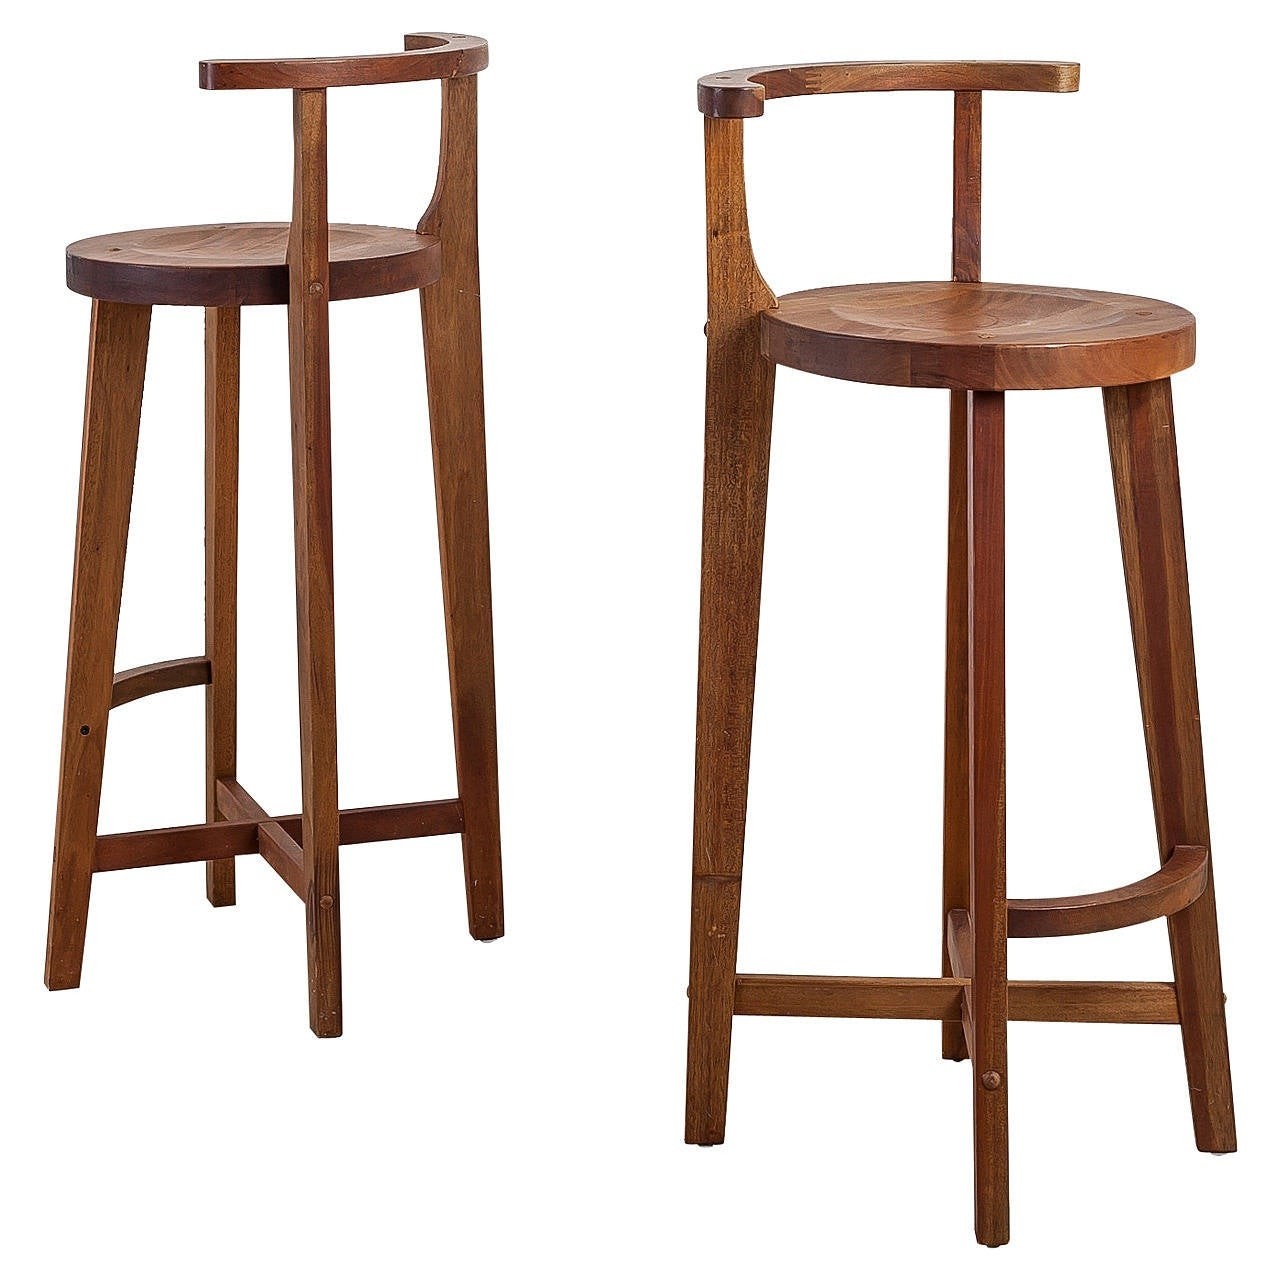 Pair studio crafted wooden bar stools with rounded back